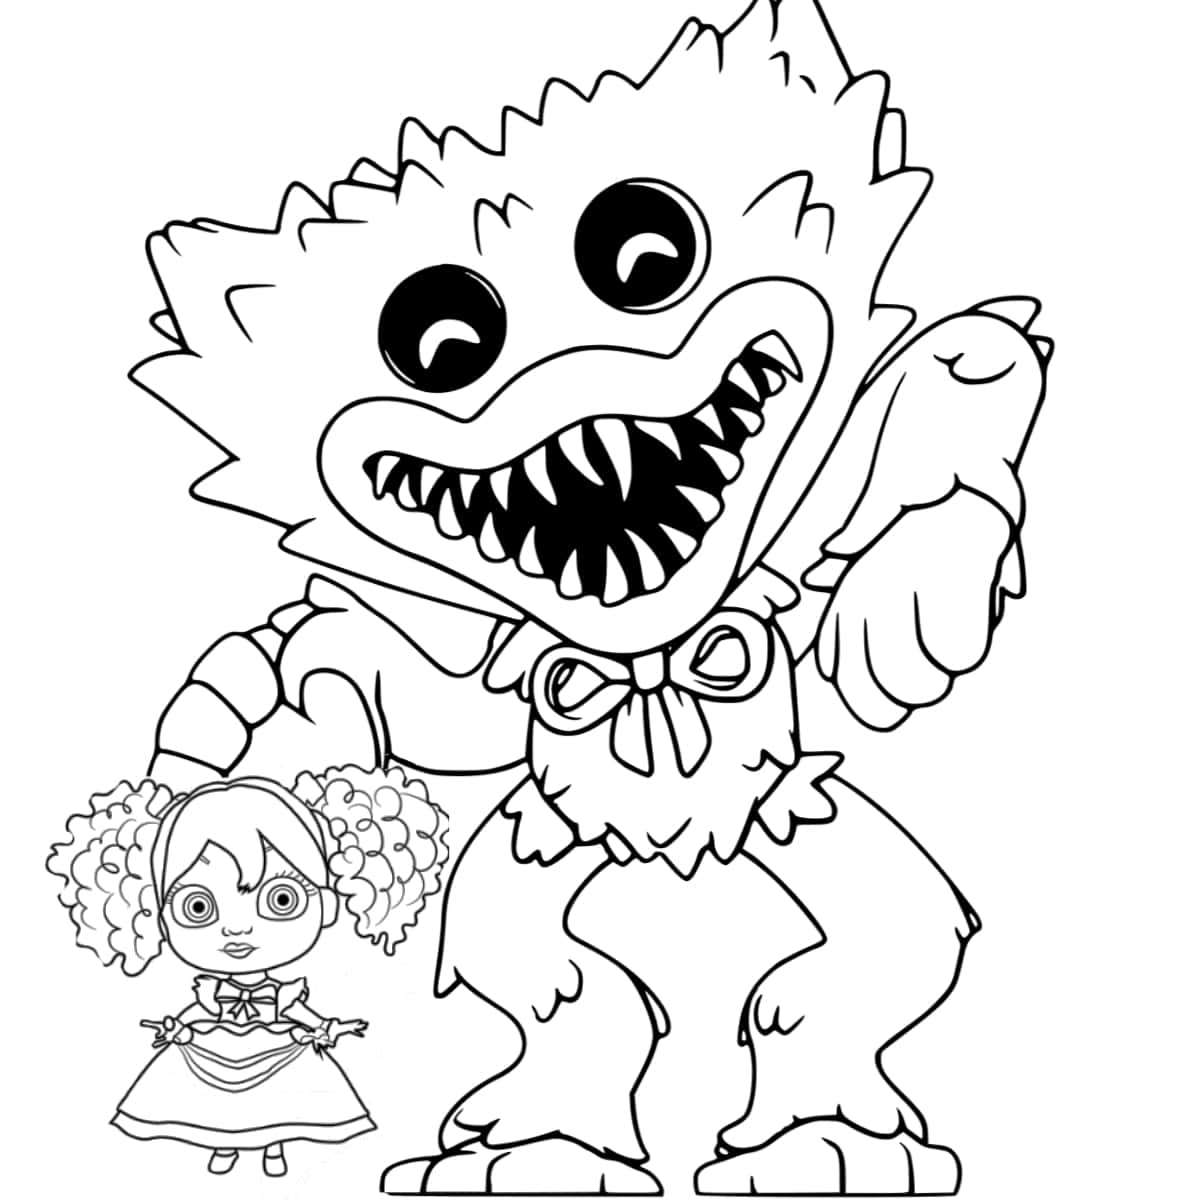 A coloring page image showing the big blue monster from Huggy Wuggy the video game with Poppy Playtime.